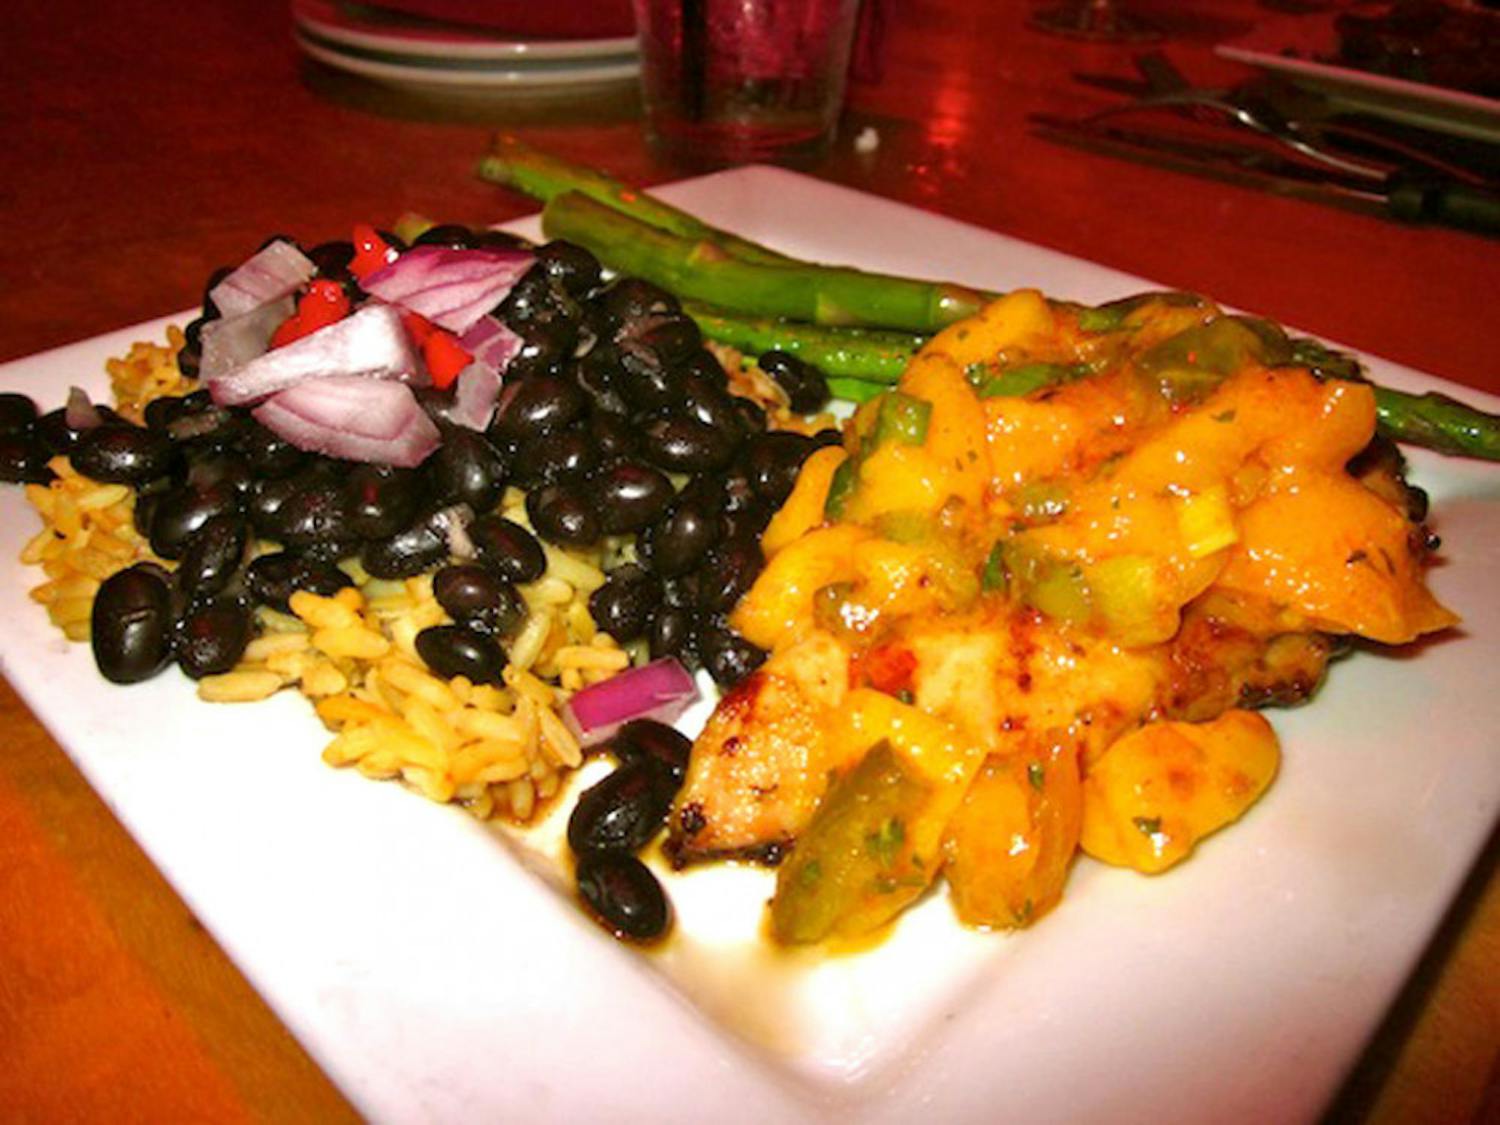 Pictured is a meal of chicken with spicy mango-jalapeño salsa, black beans over Spanish rice and asparagus from Emiliano’s.